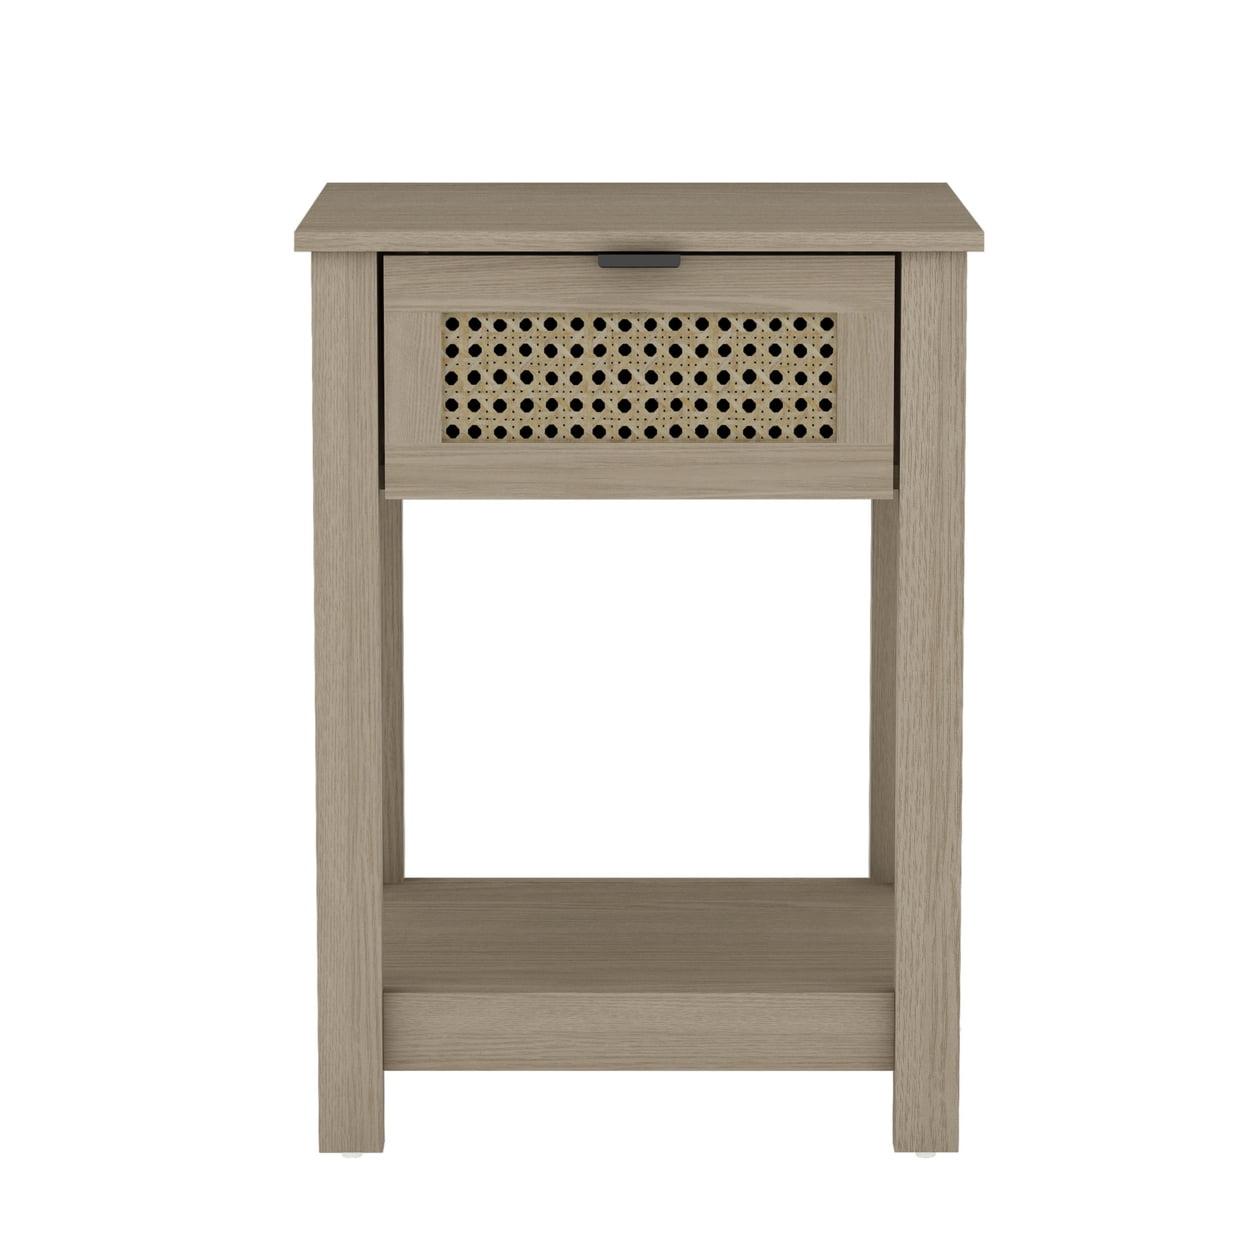 Idiana Oslo Oak 1-Drawer Nightstand with Metal Accents